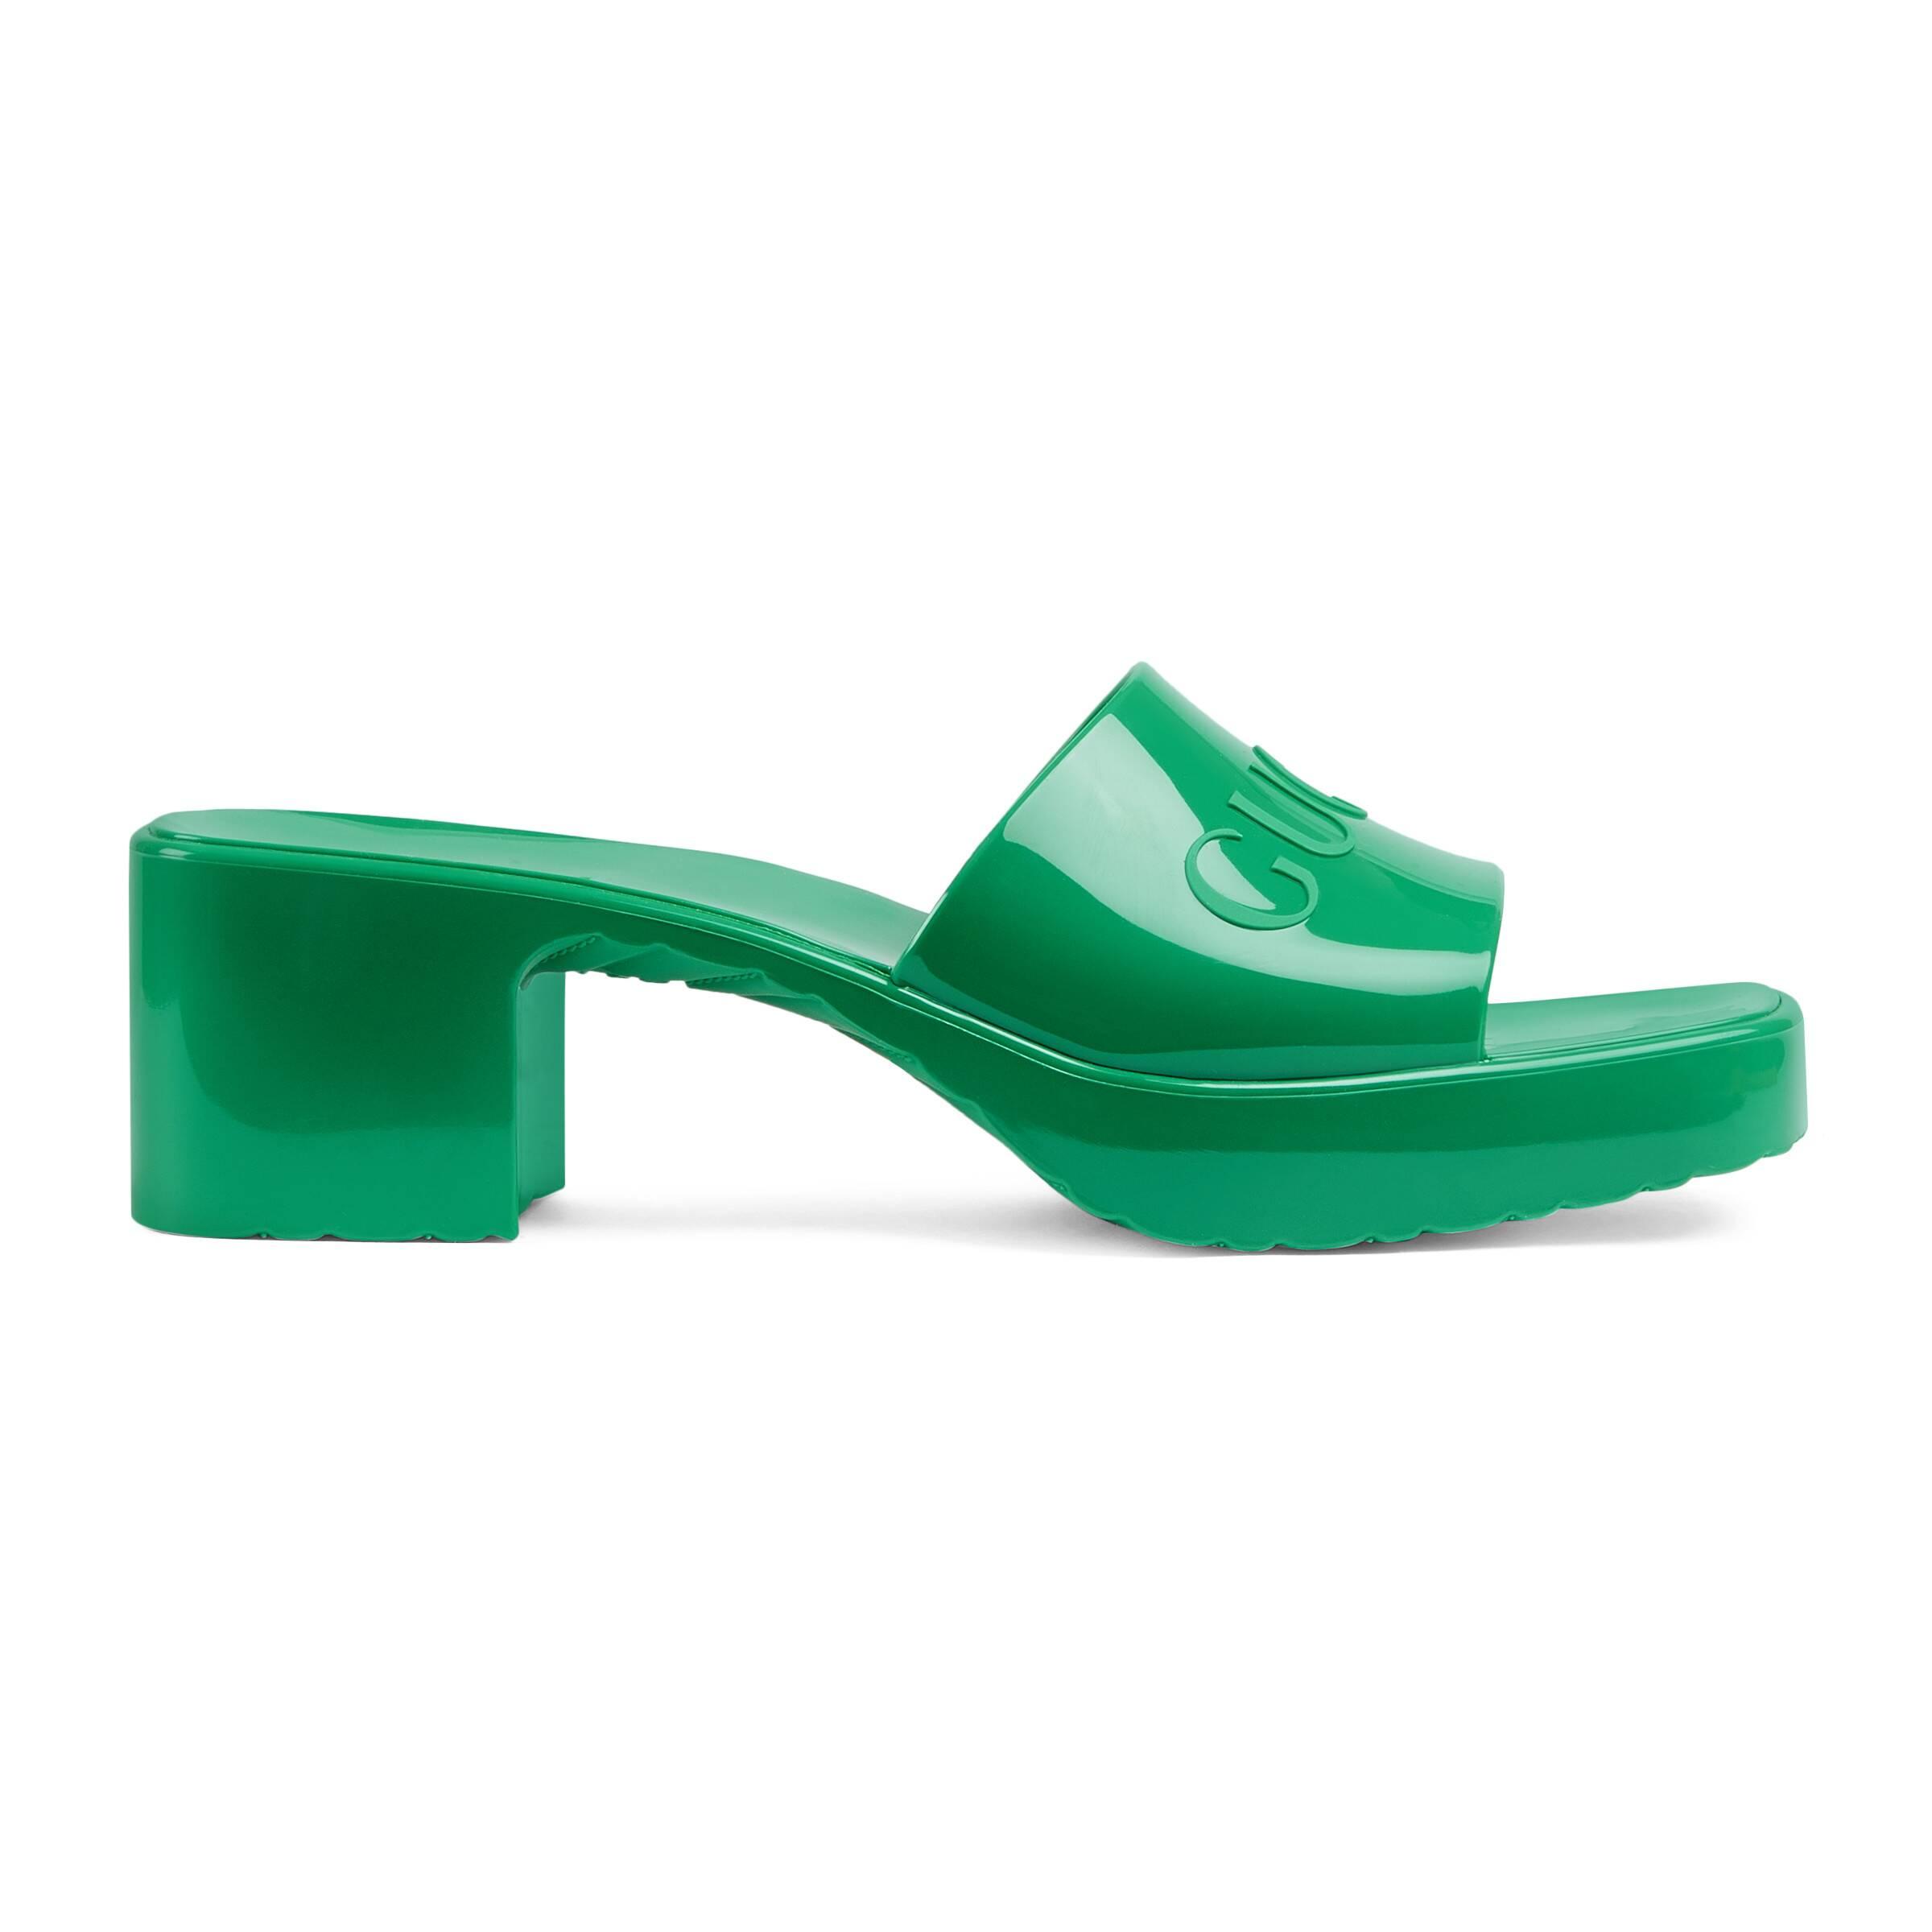 Gucci Rubber Slide Sandal With Logo in Green - Lyst